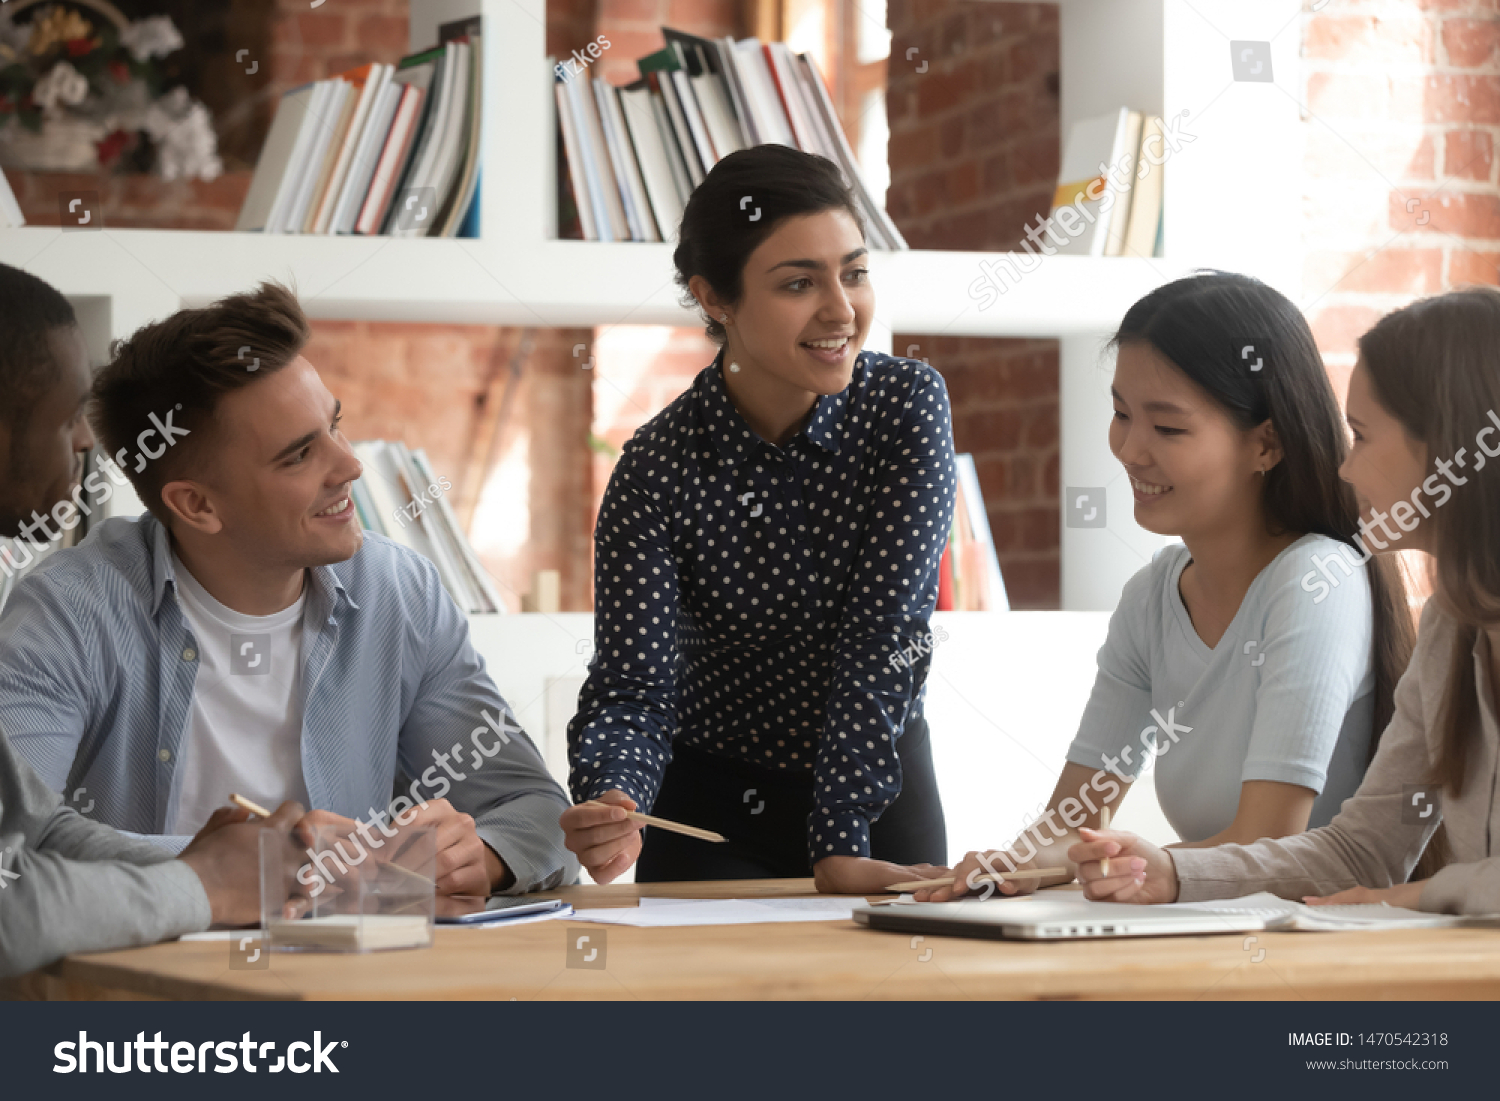 Cheerful indian female team leader involved in studying process, explaining new material to mixed race friends. Group of smiling diverse students discussing together school project ideas in classroom. #1470542318